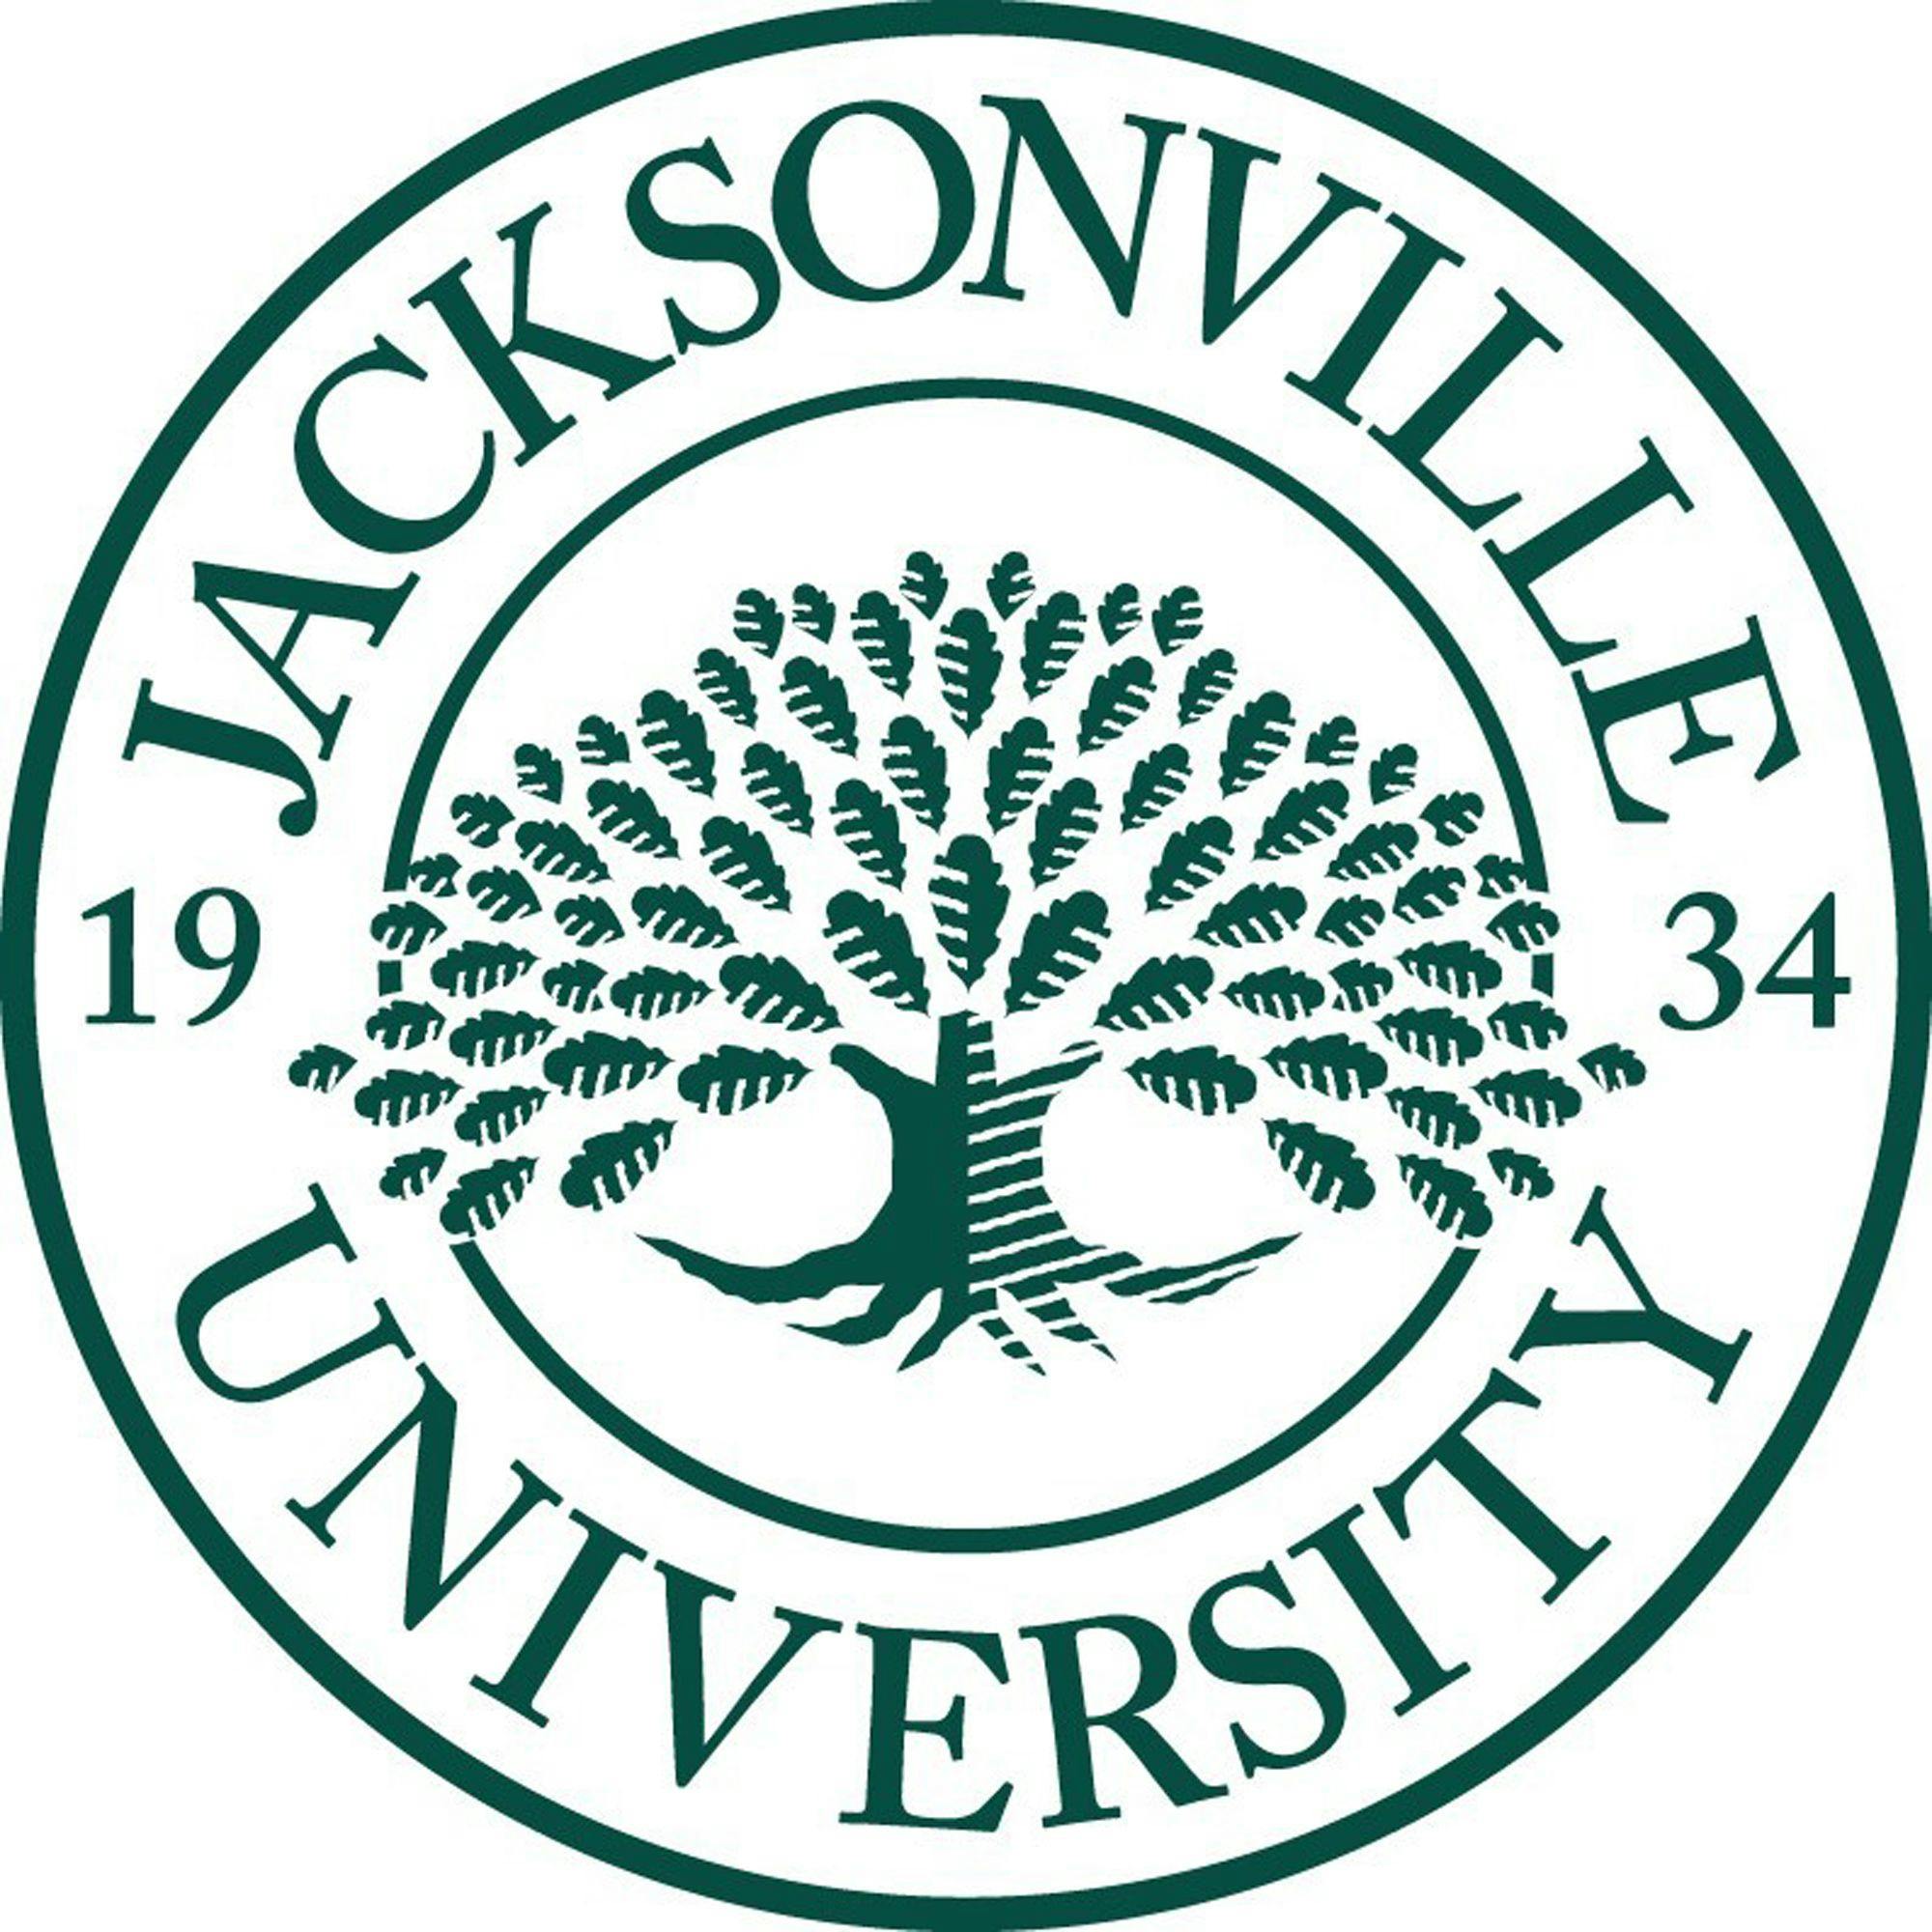 Jacksonville University to Launch Florida’s First Certificate in Oral Implantology